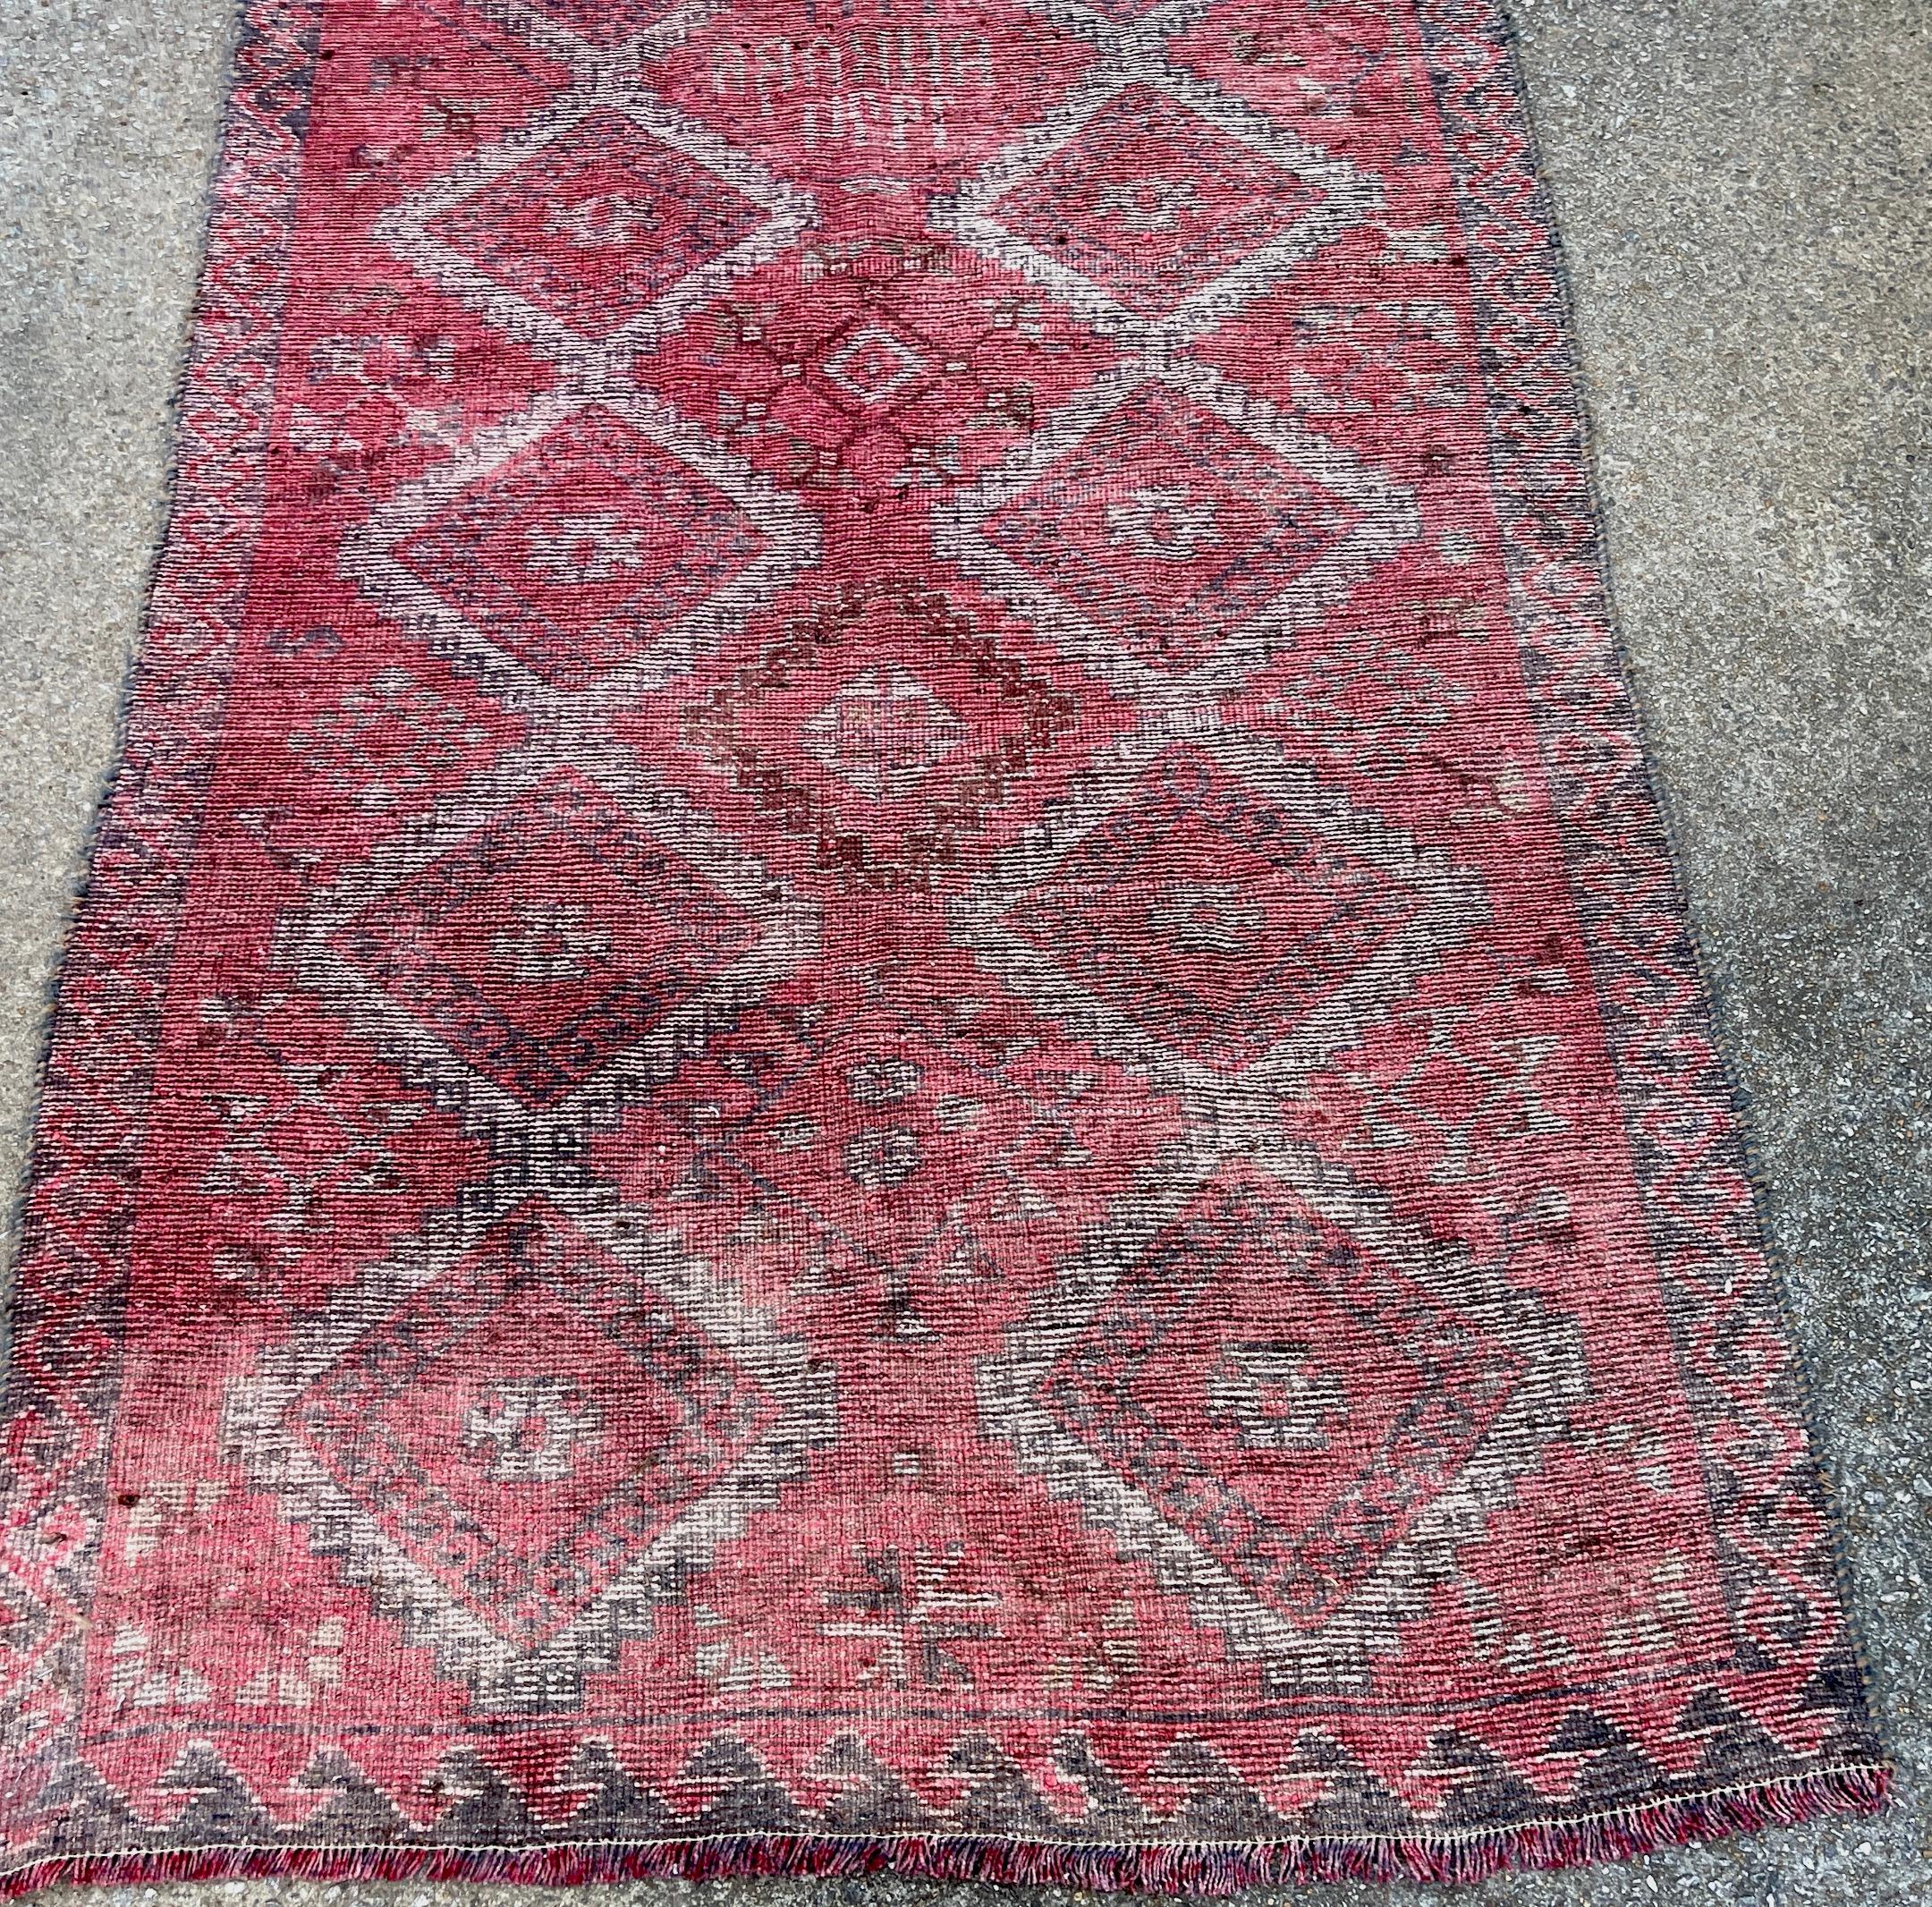 Distressed Hand-Knotted Wool Caucasian Rug 'Reservable' Signed & Dated 1994 For Sale 5